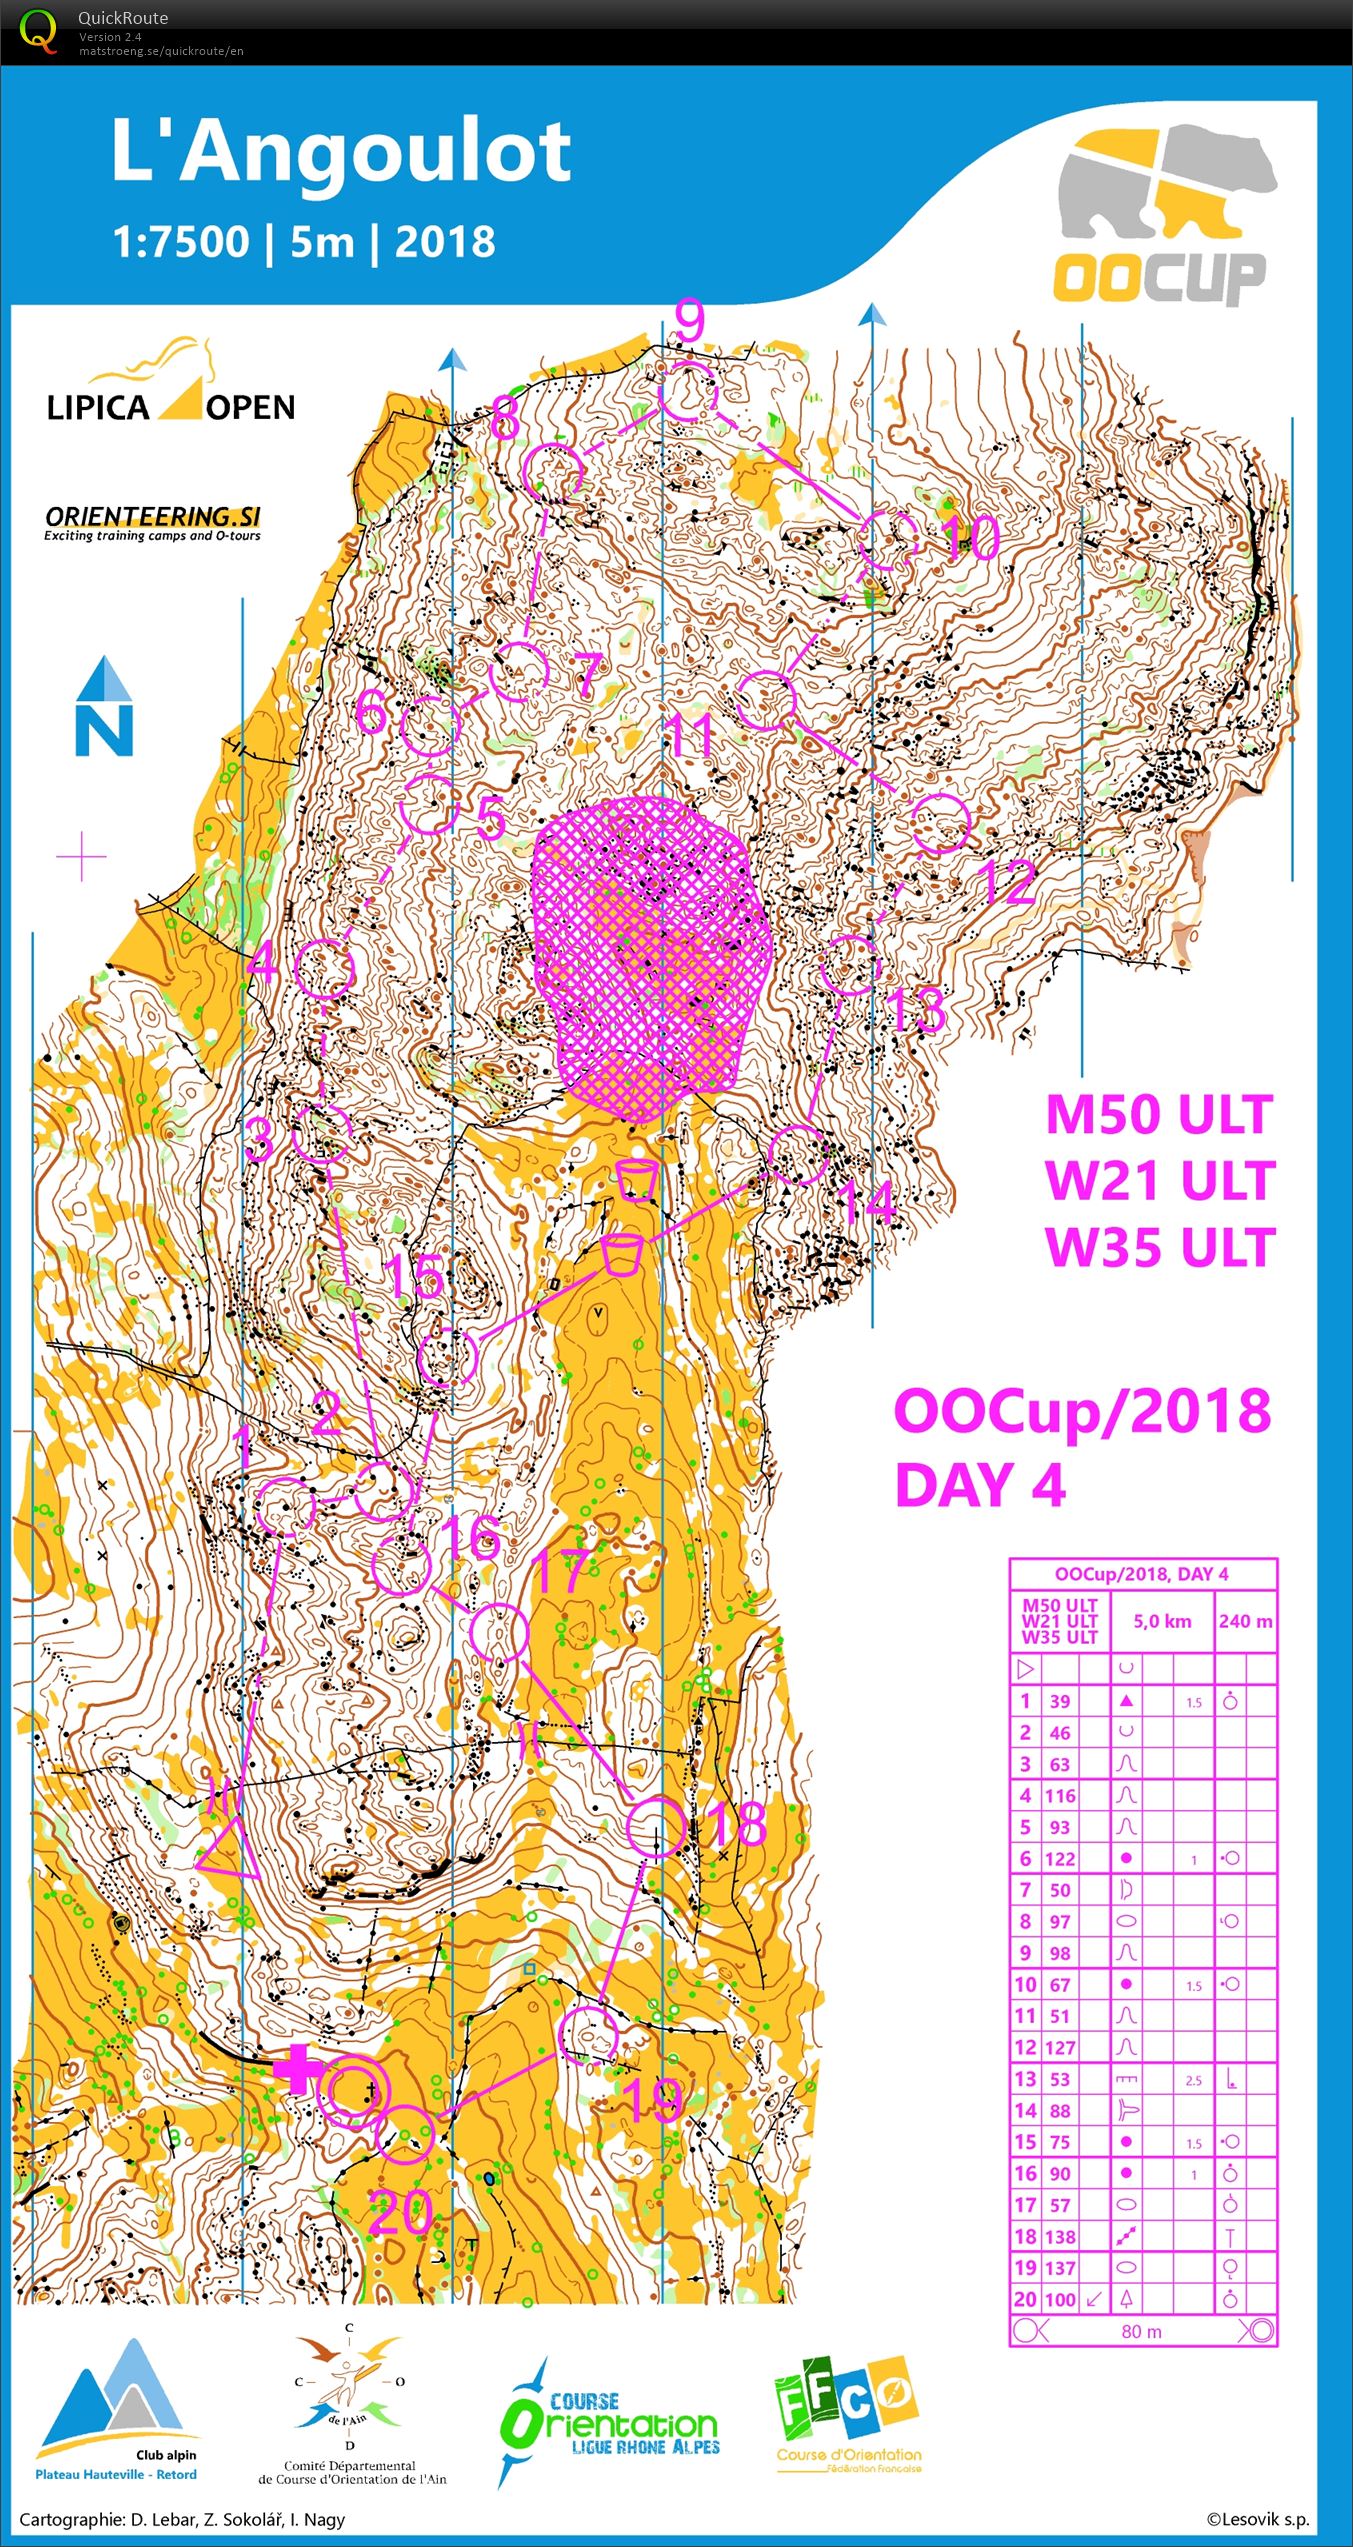 OOcup 2018 - Day 4 (28/07/2018)